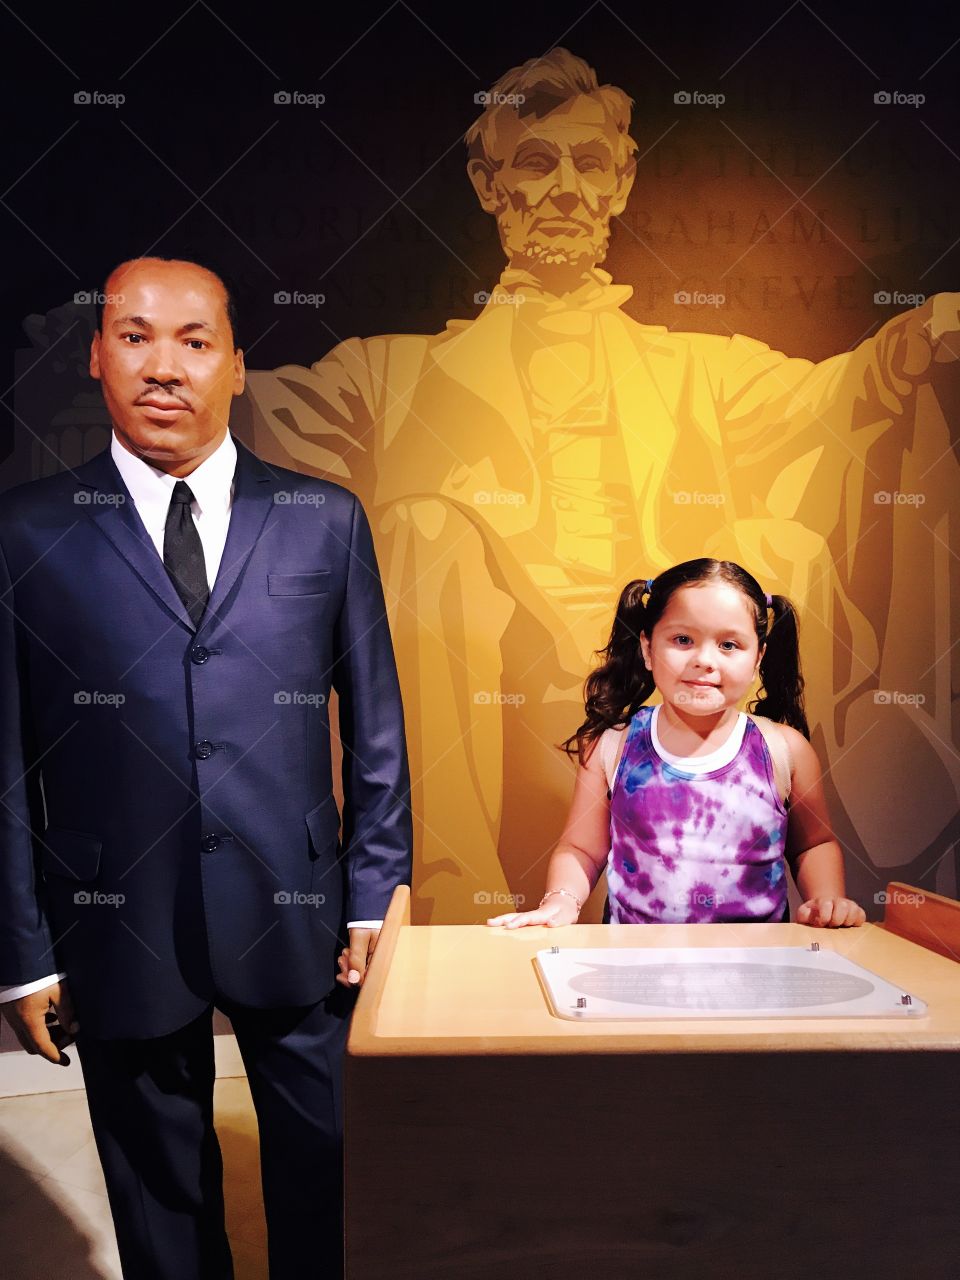 Sofia and Martin Luther King Jr.  